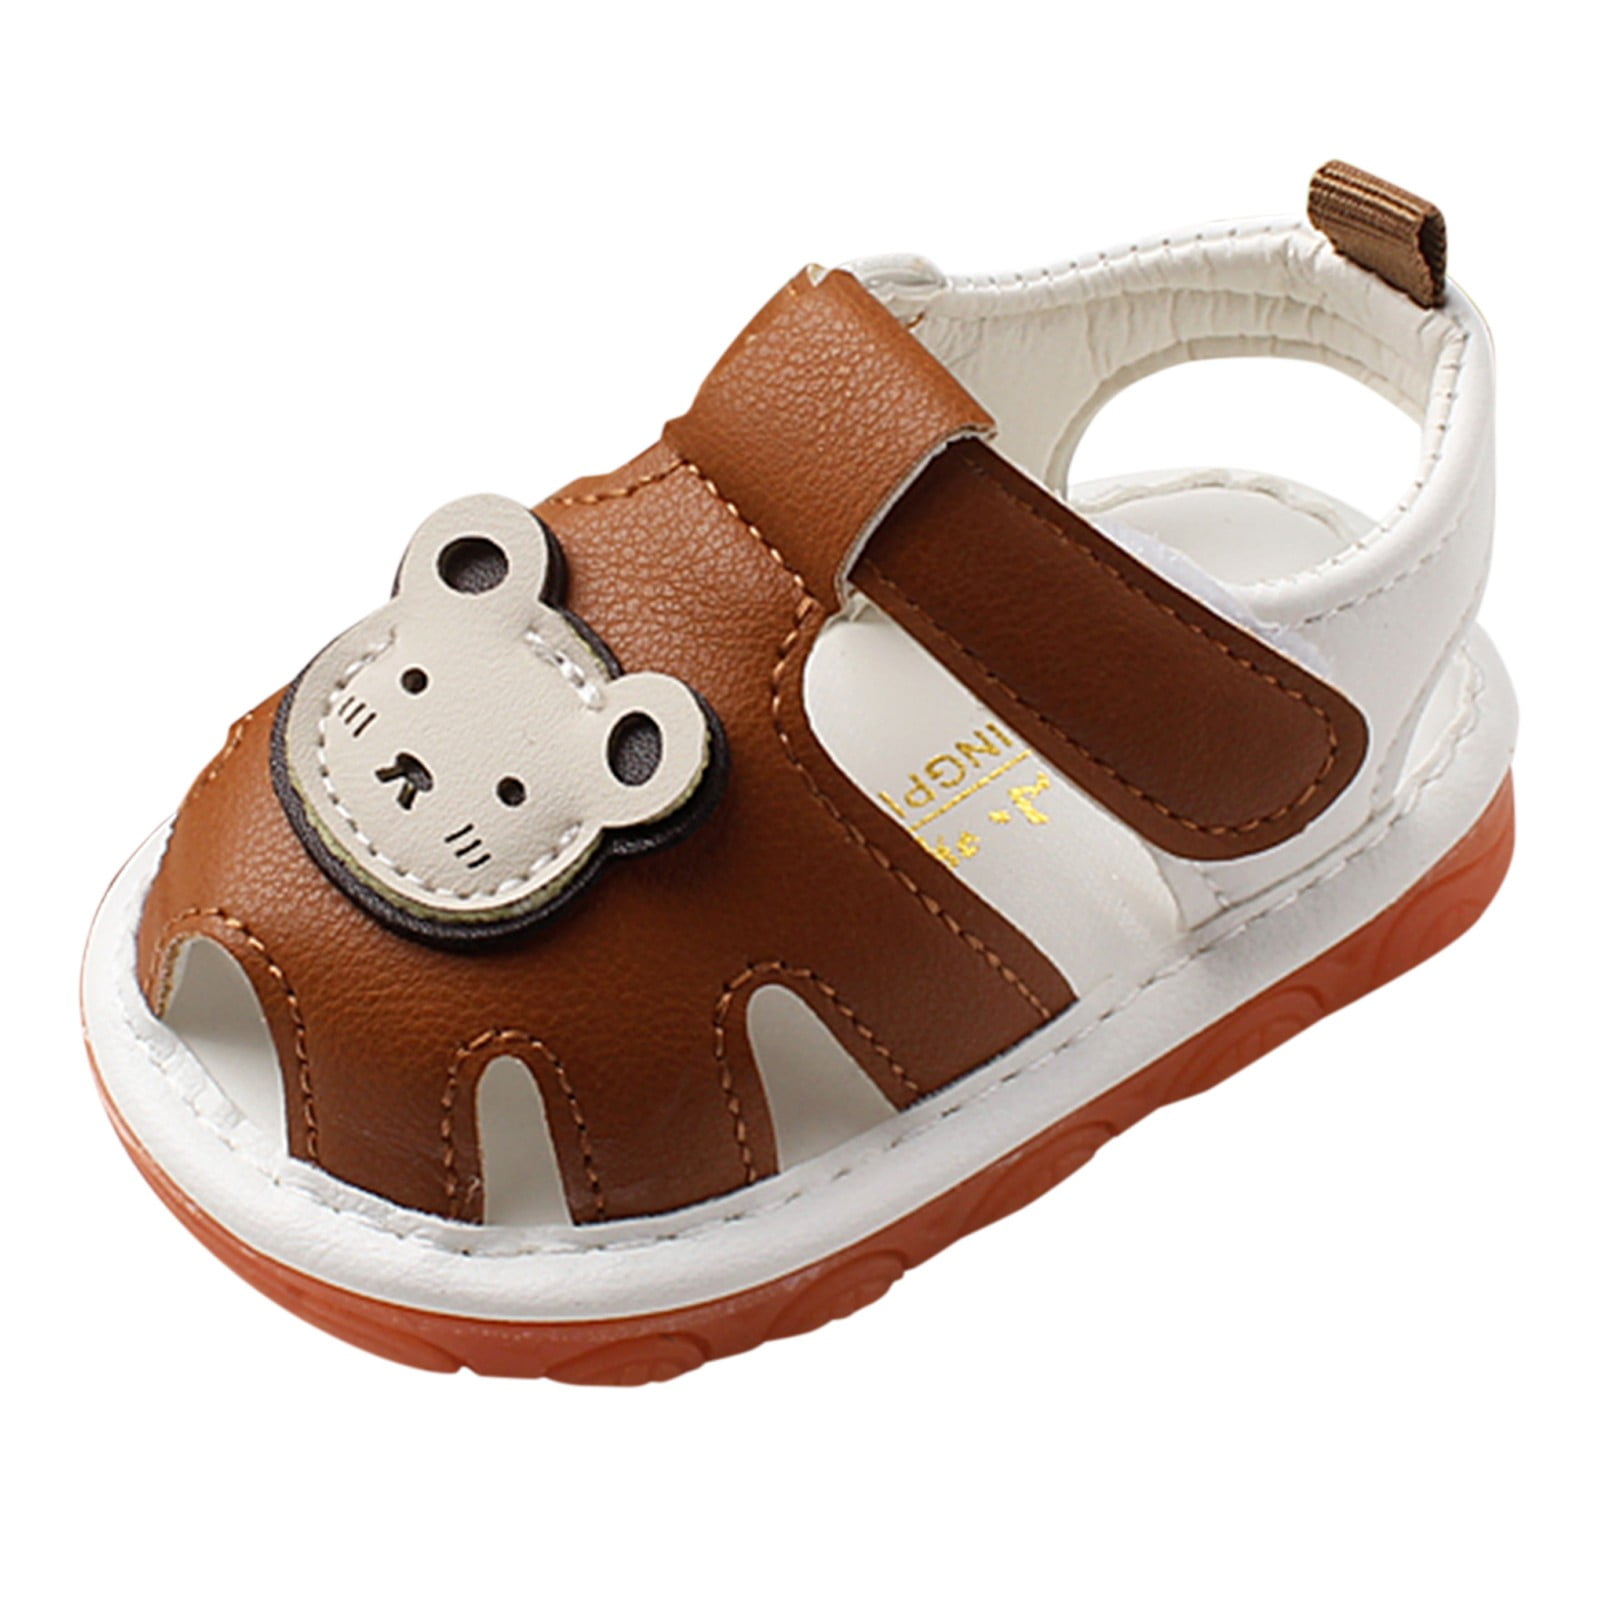 Bulk-buy Baby Boy Sandals with Sound New Whistle Baby Shoes price comparison